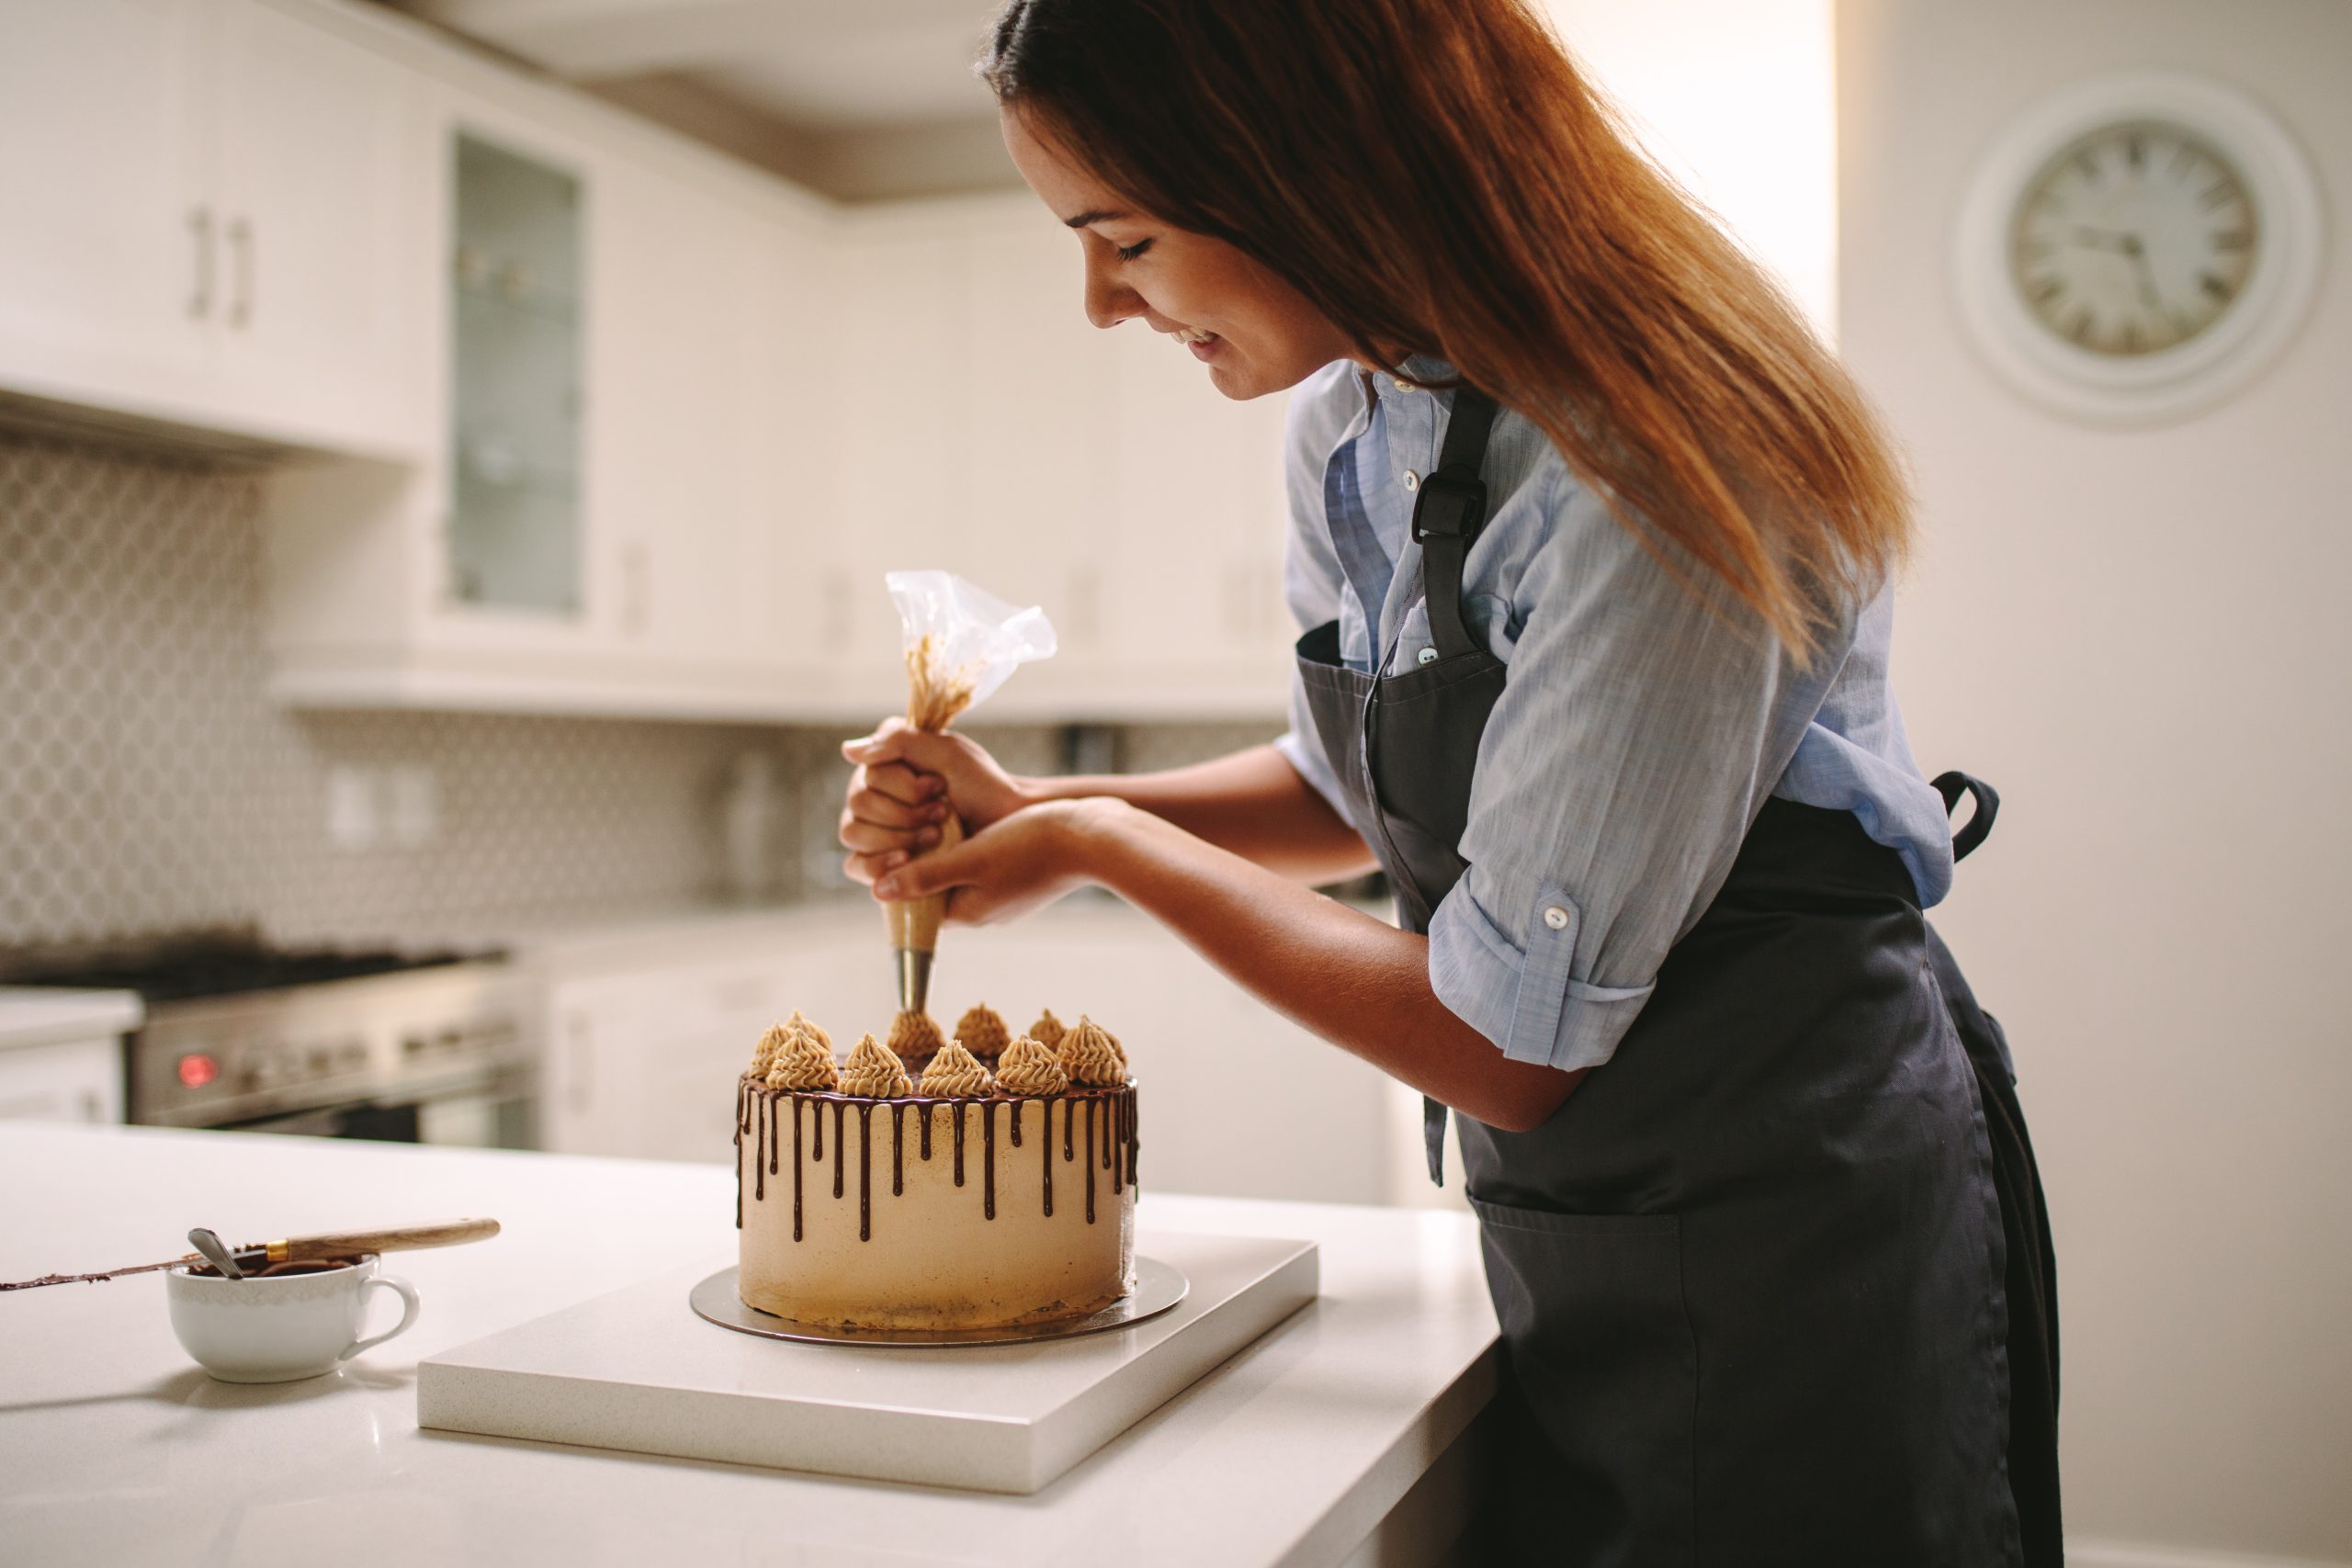 Common Exposures for Bakeries